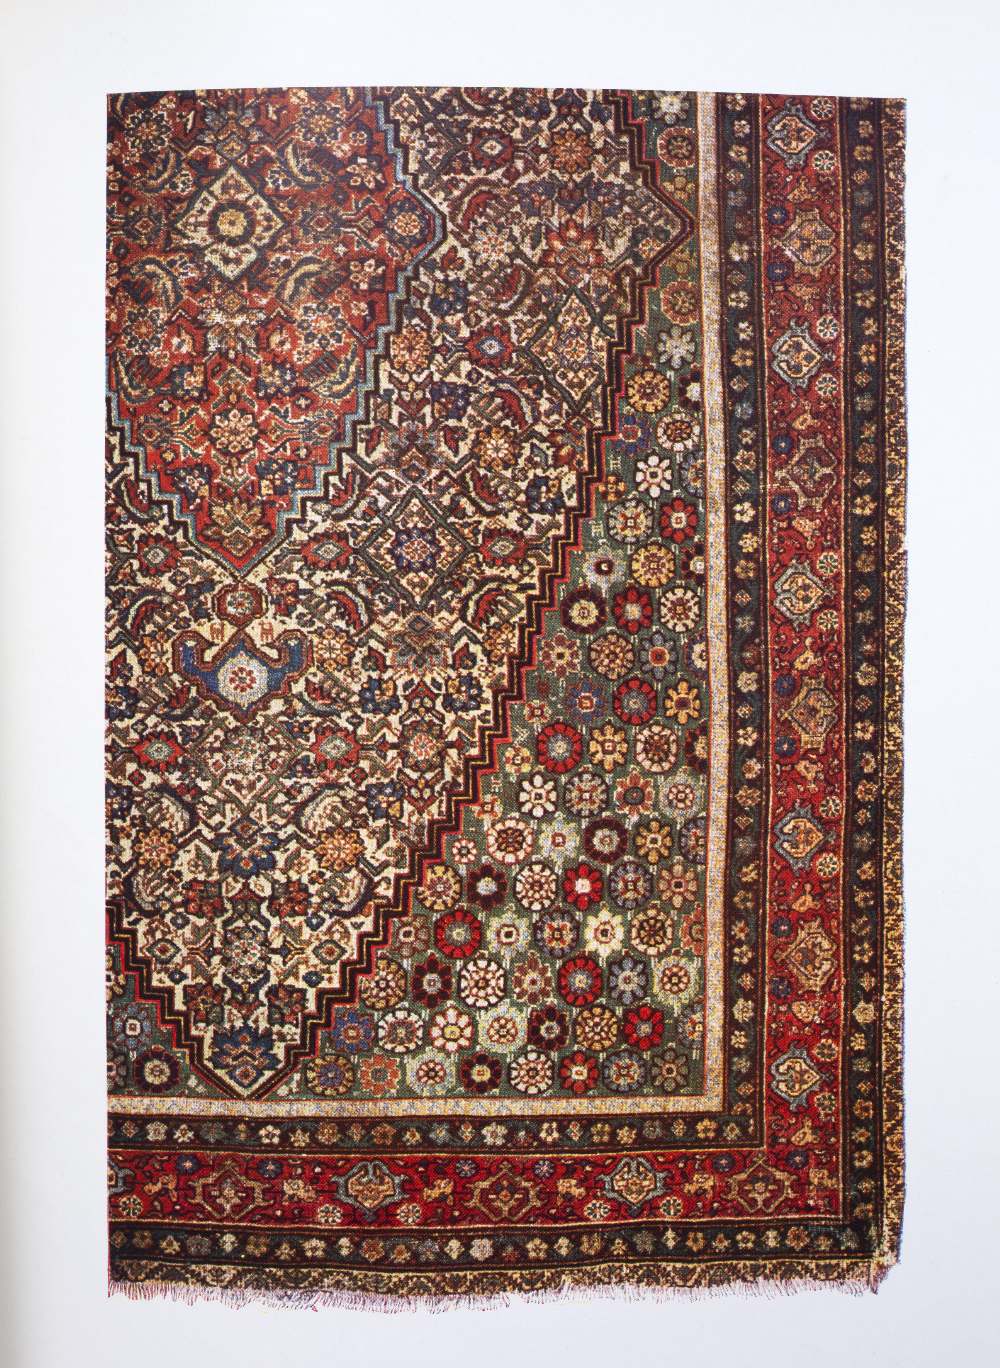 KENDRICK, A.F. AND TATTERSALL, C.E.C., Handwoven Carpets, Oriental and European, Benn Bros London - Image 2 of 2